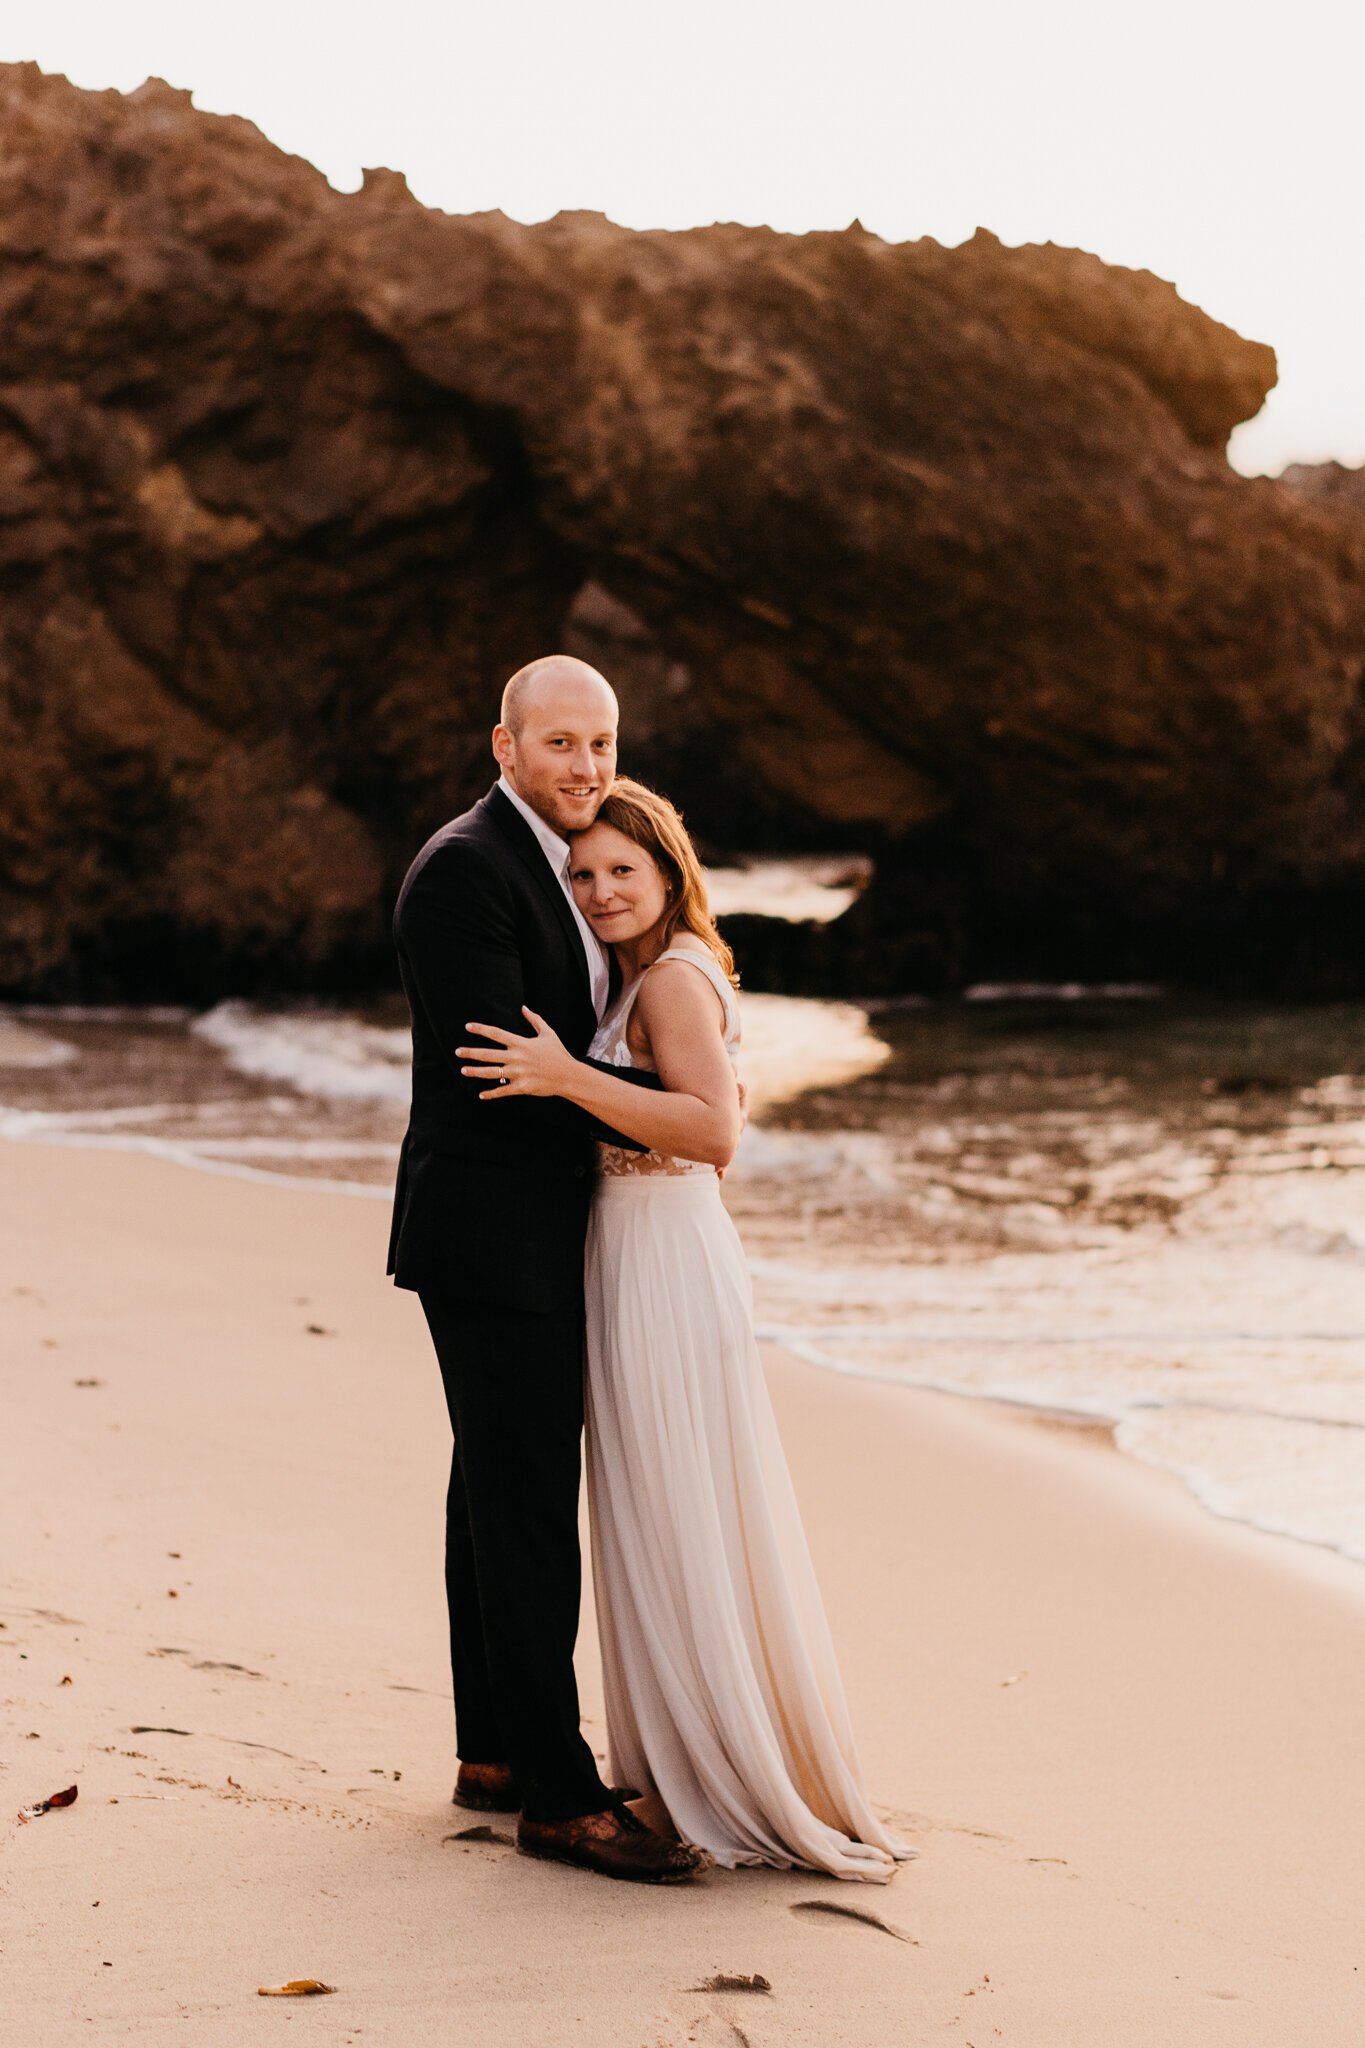 Big Sur Elopement couple in wedding attire on beach embracing,  large rock with key hole in background